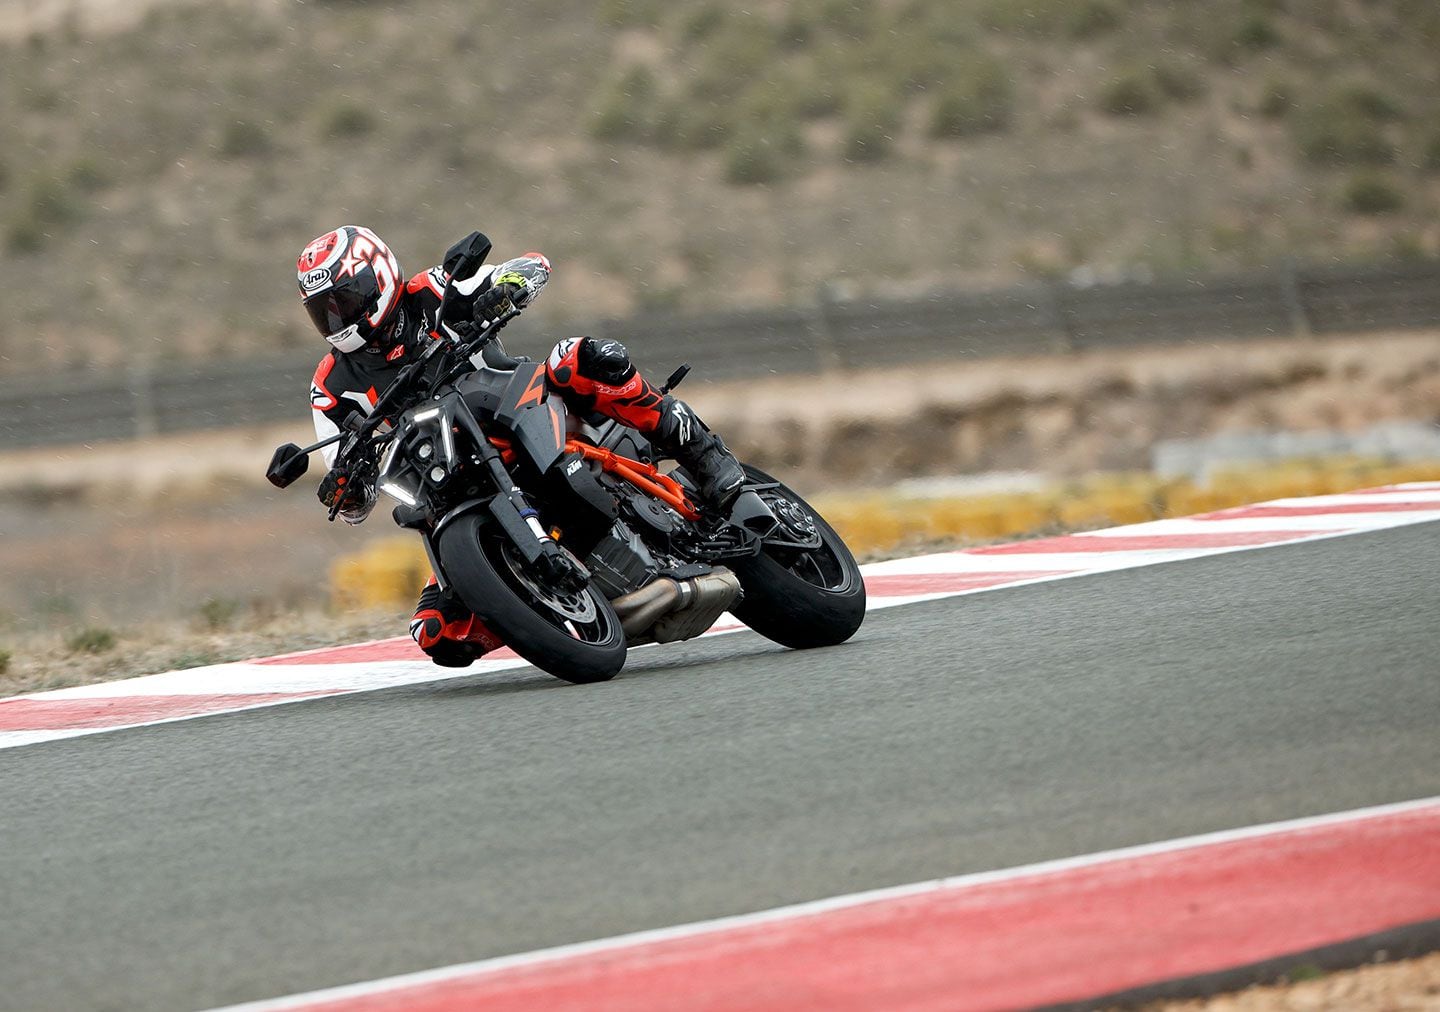 Despite the addition of variable valve timing, the Super Duke is still quite rowdy. Credit the massive amounts of torque that KTM continues to dump into this package.